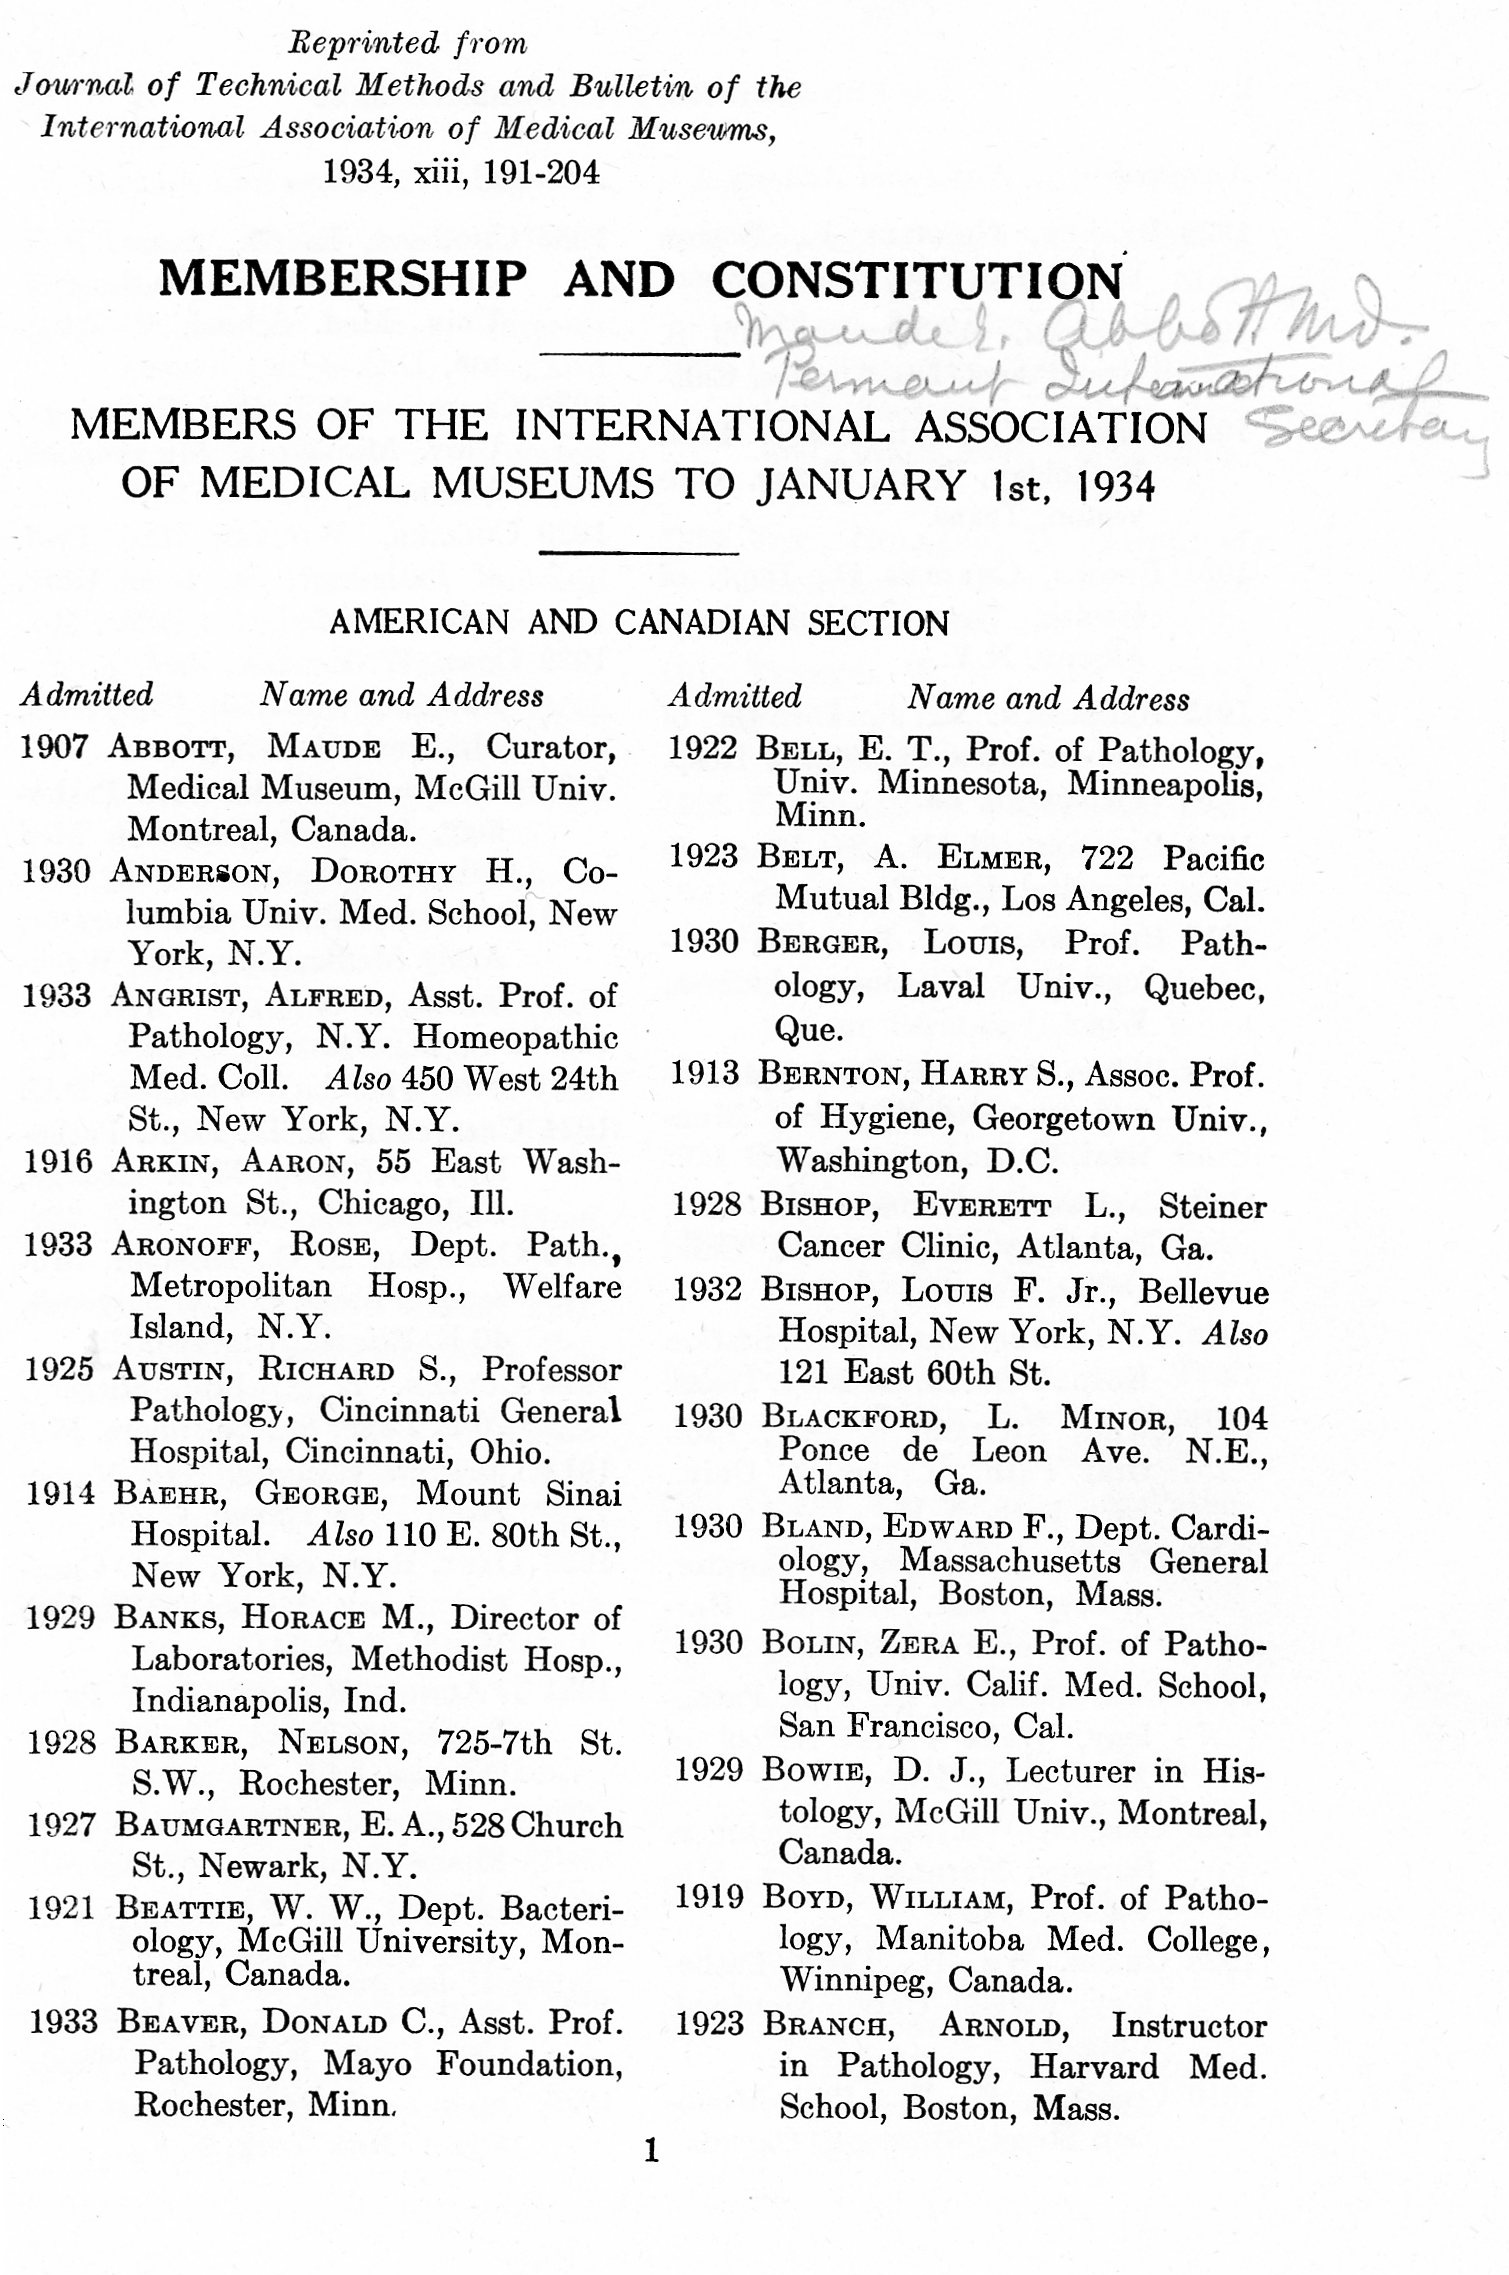 Page 1 of the list of members of the International Association of Medical Museums to January 1, 1934. Black ink on white paper. The list is in two columns and indicates the year of admission to the association, name and address. The first entry on this page reads “1907 – Abbott, Maude E., Curator, Medical Museum, McGill Univ. Montreal, Canada”. There is a handwritten note in pencil in the upper right corner of the page: “Maude E. Abbott md., permanent international secretary.”